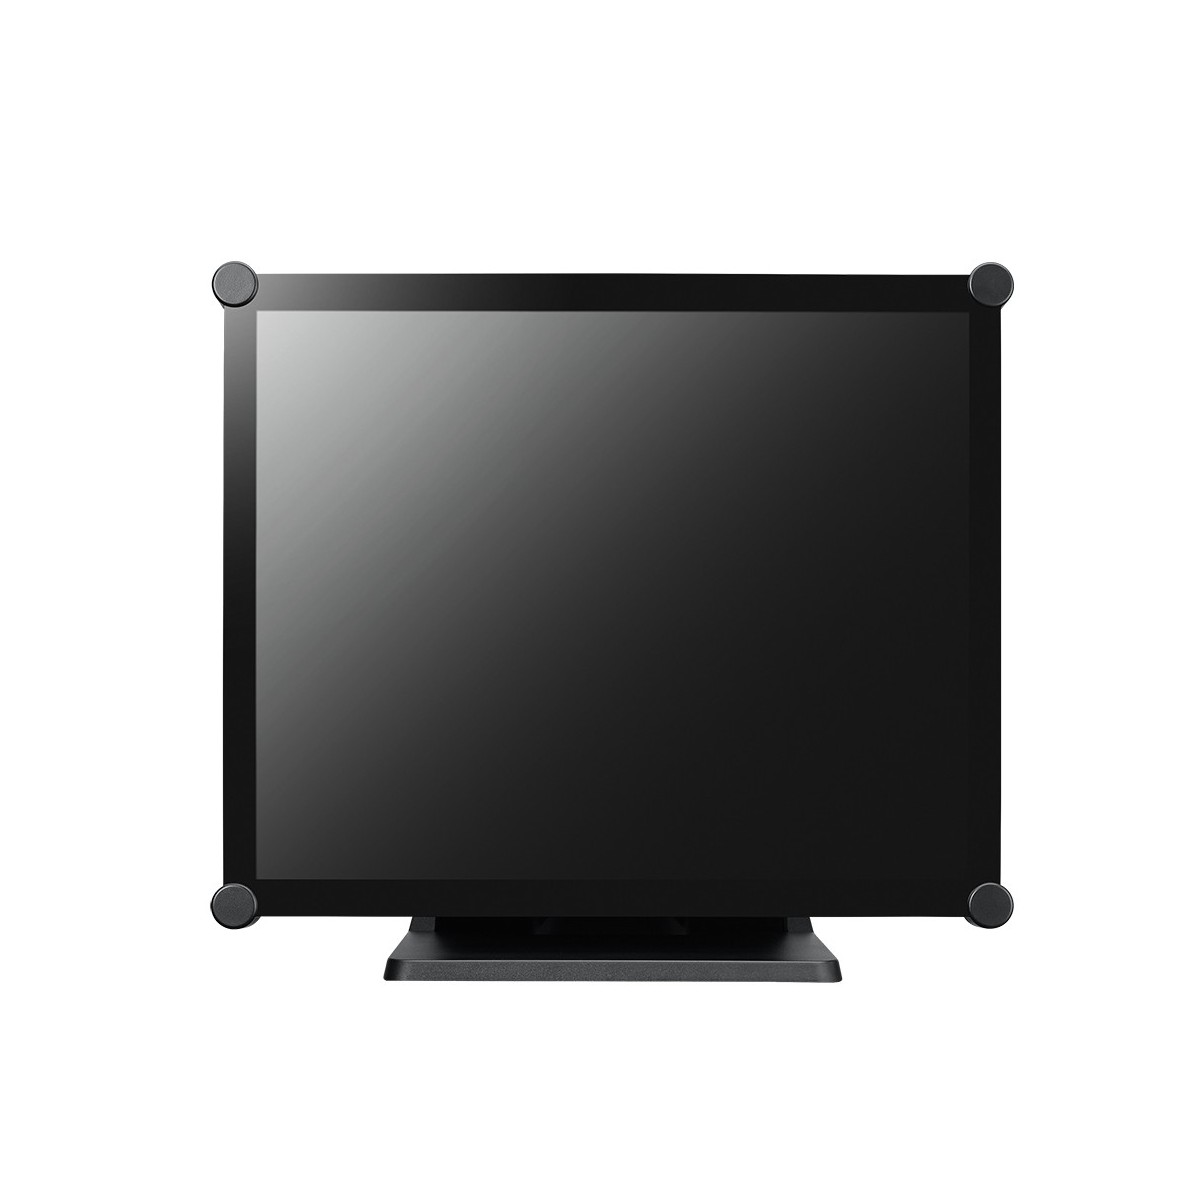 AG Neovo TX1702 Multi-Touch Capacitive LED Monitor 17